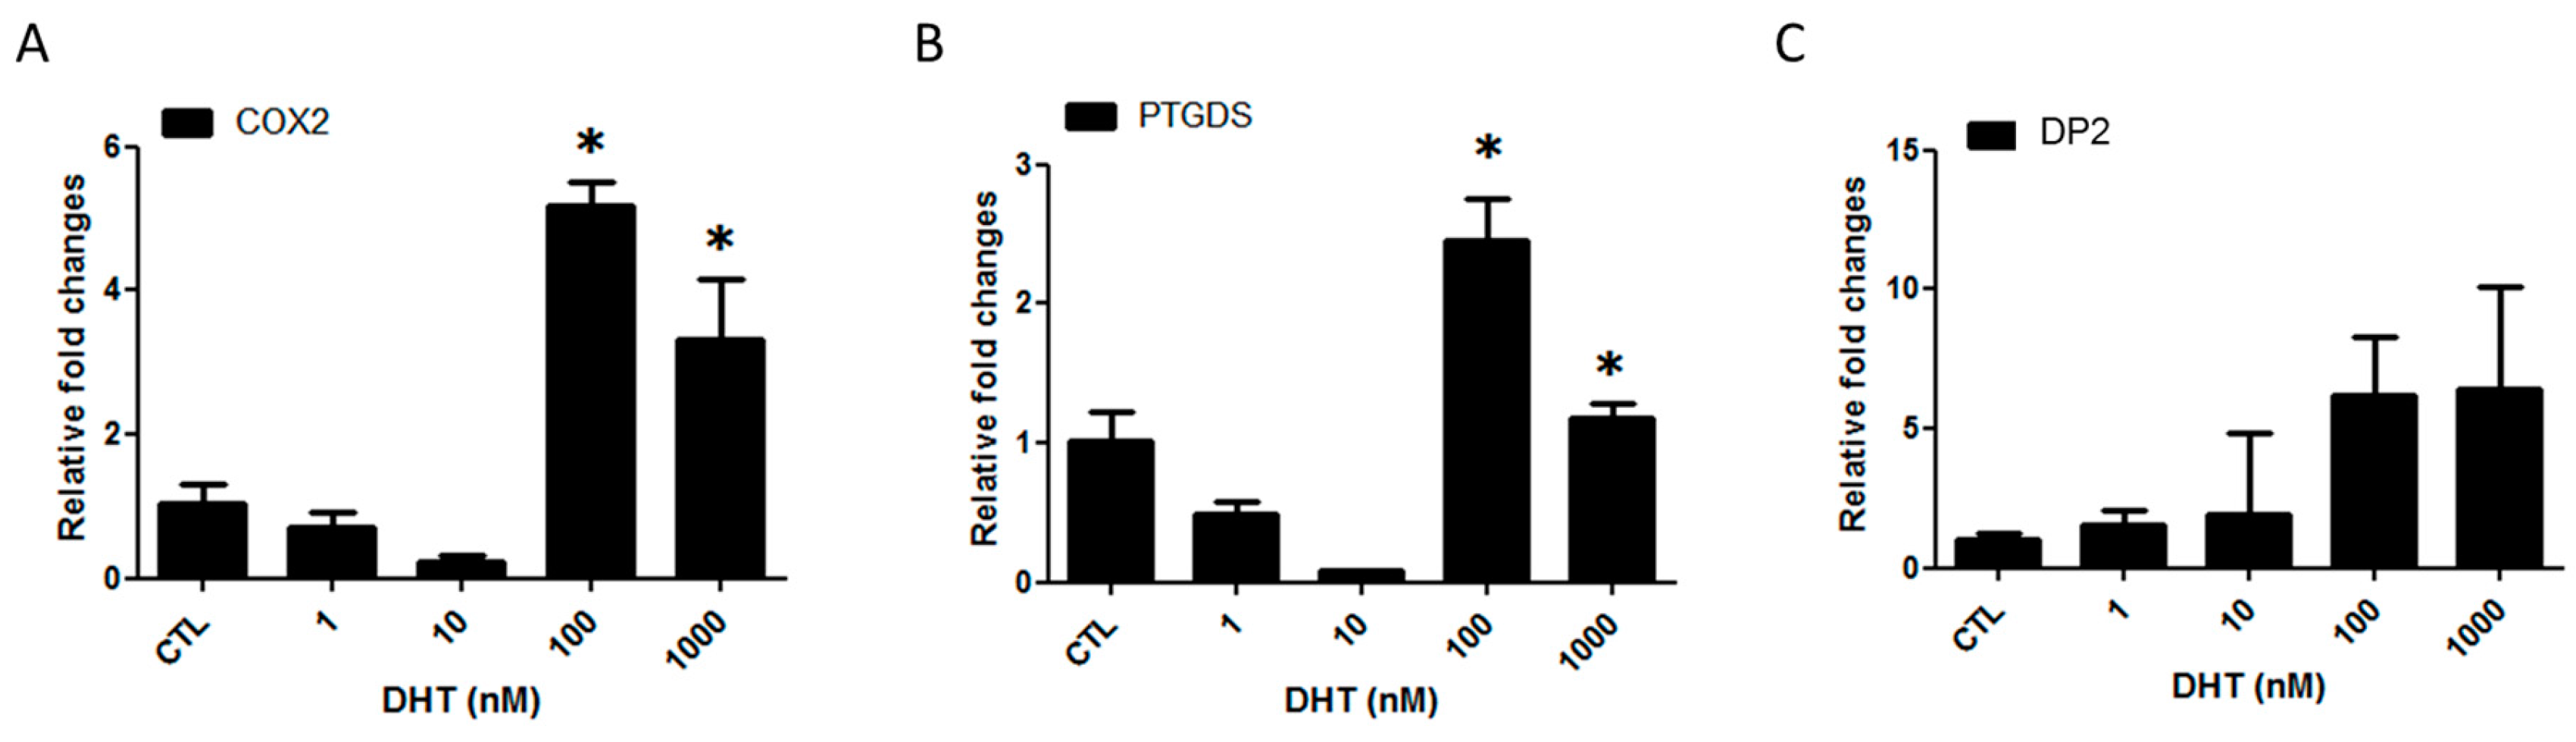 IJMS | Free Full-Text | Prostaglandin D2-Mediated DP2 and AKT Signal  Regulate the Activation of Androgen Receptors in Human Dermal Papilla Cells